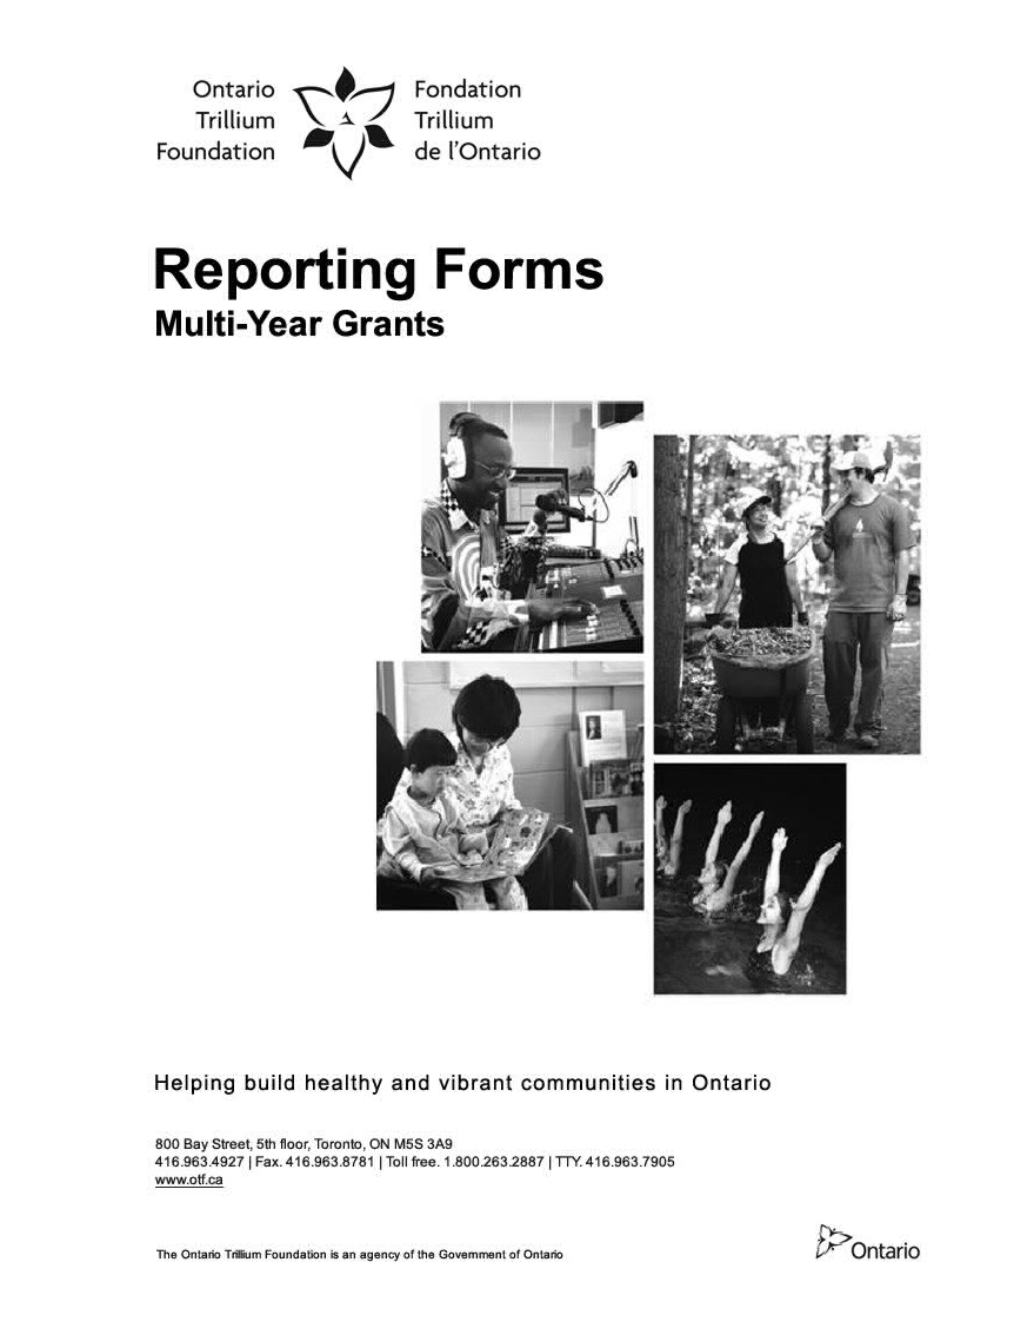 Reporting Forms for Multi-Year Grants